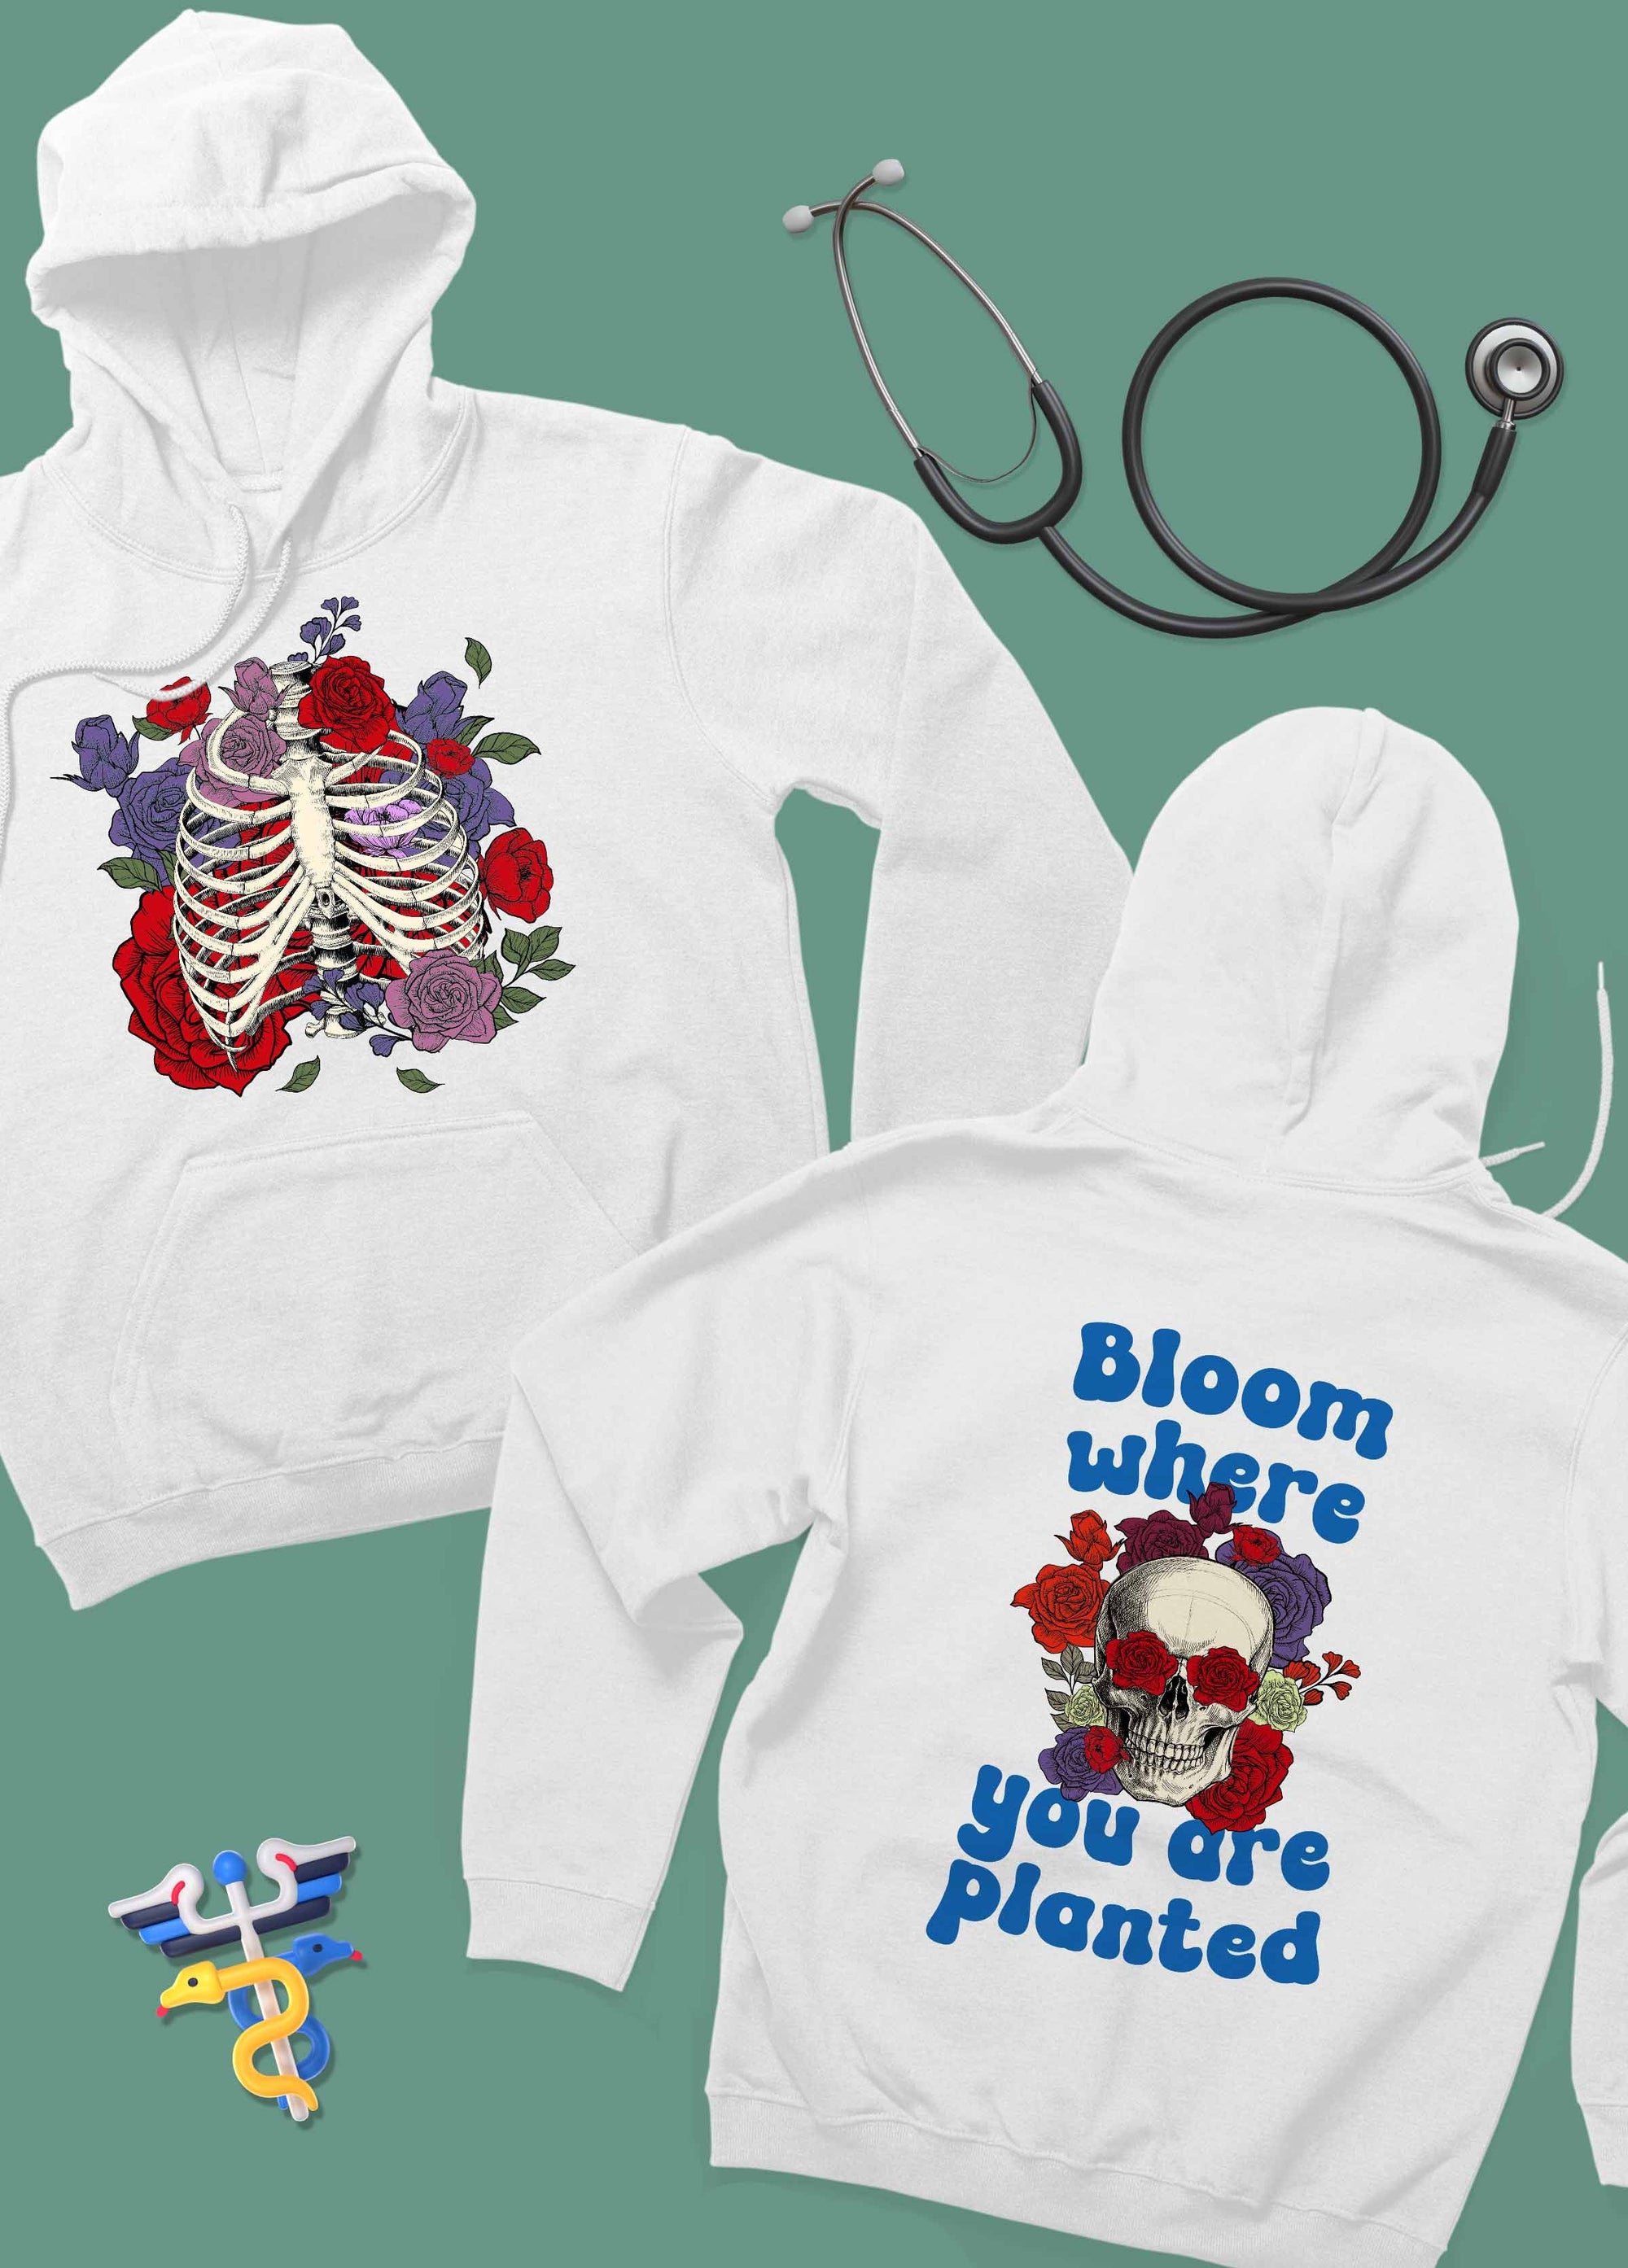 Bloom Where You Are Planted - Unisex Hoodie For Orthopedic Doctors &amp; Anatomists